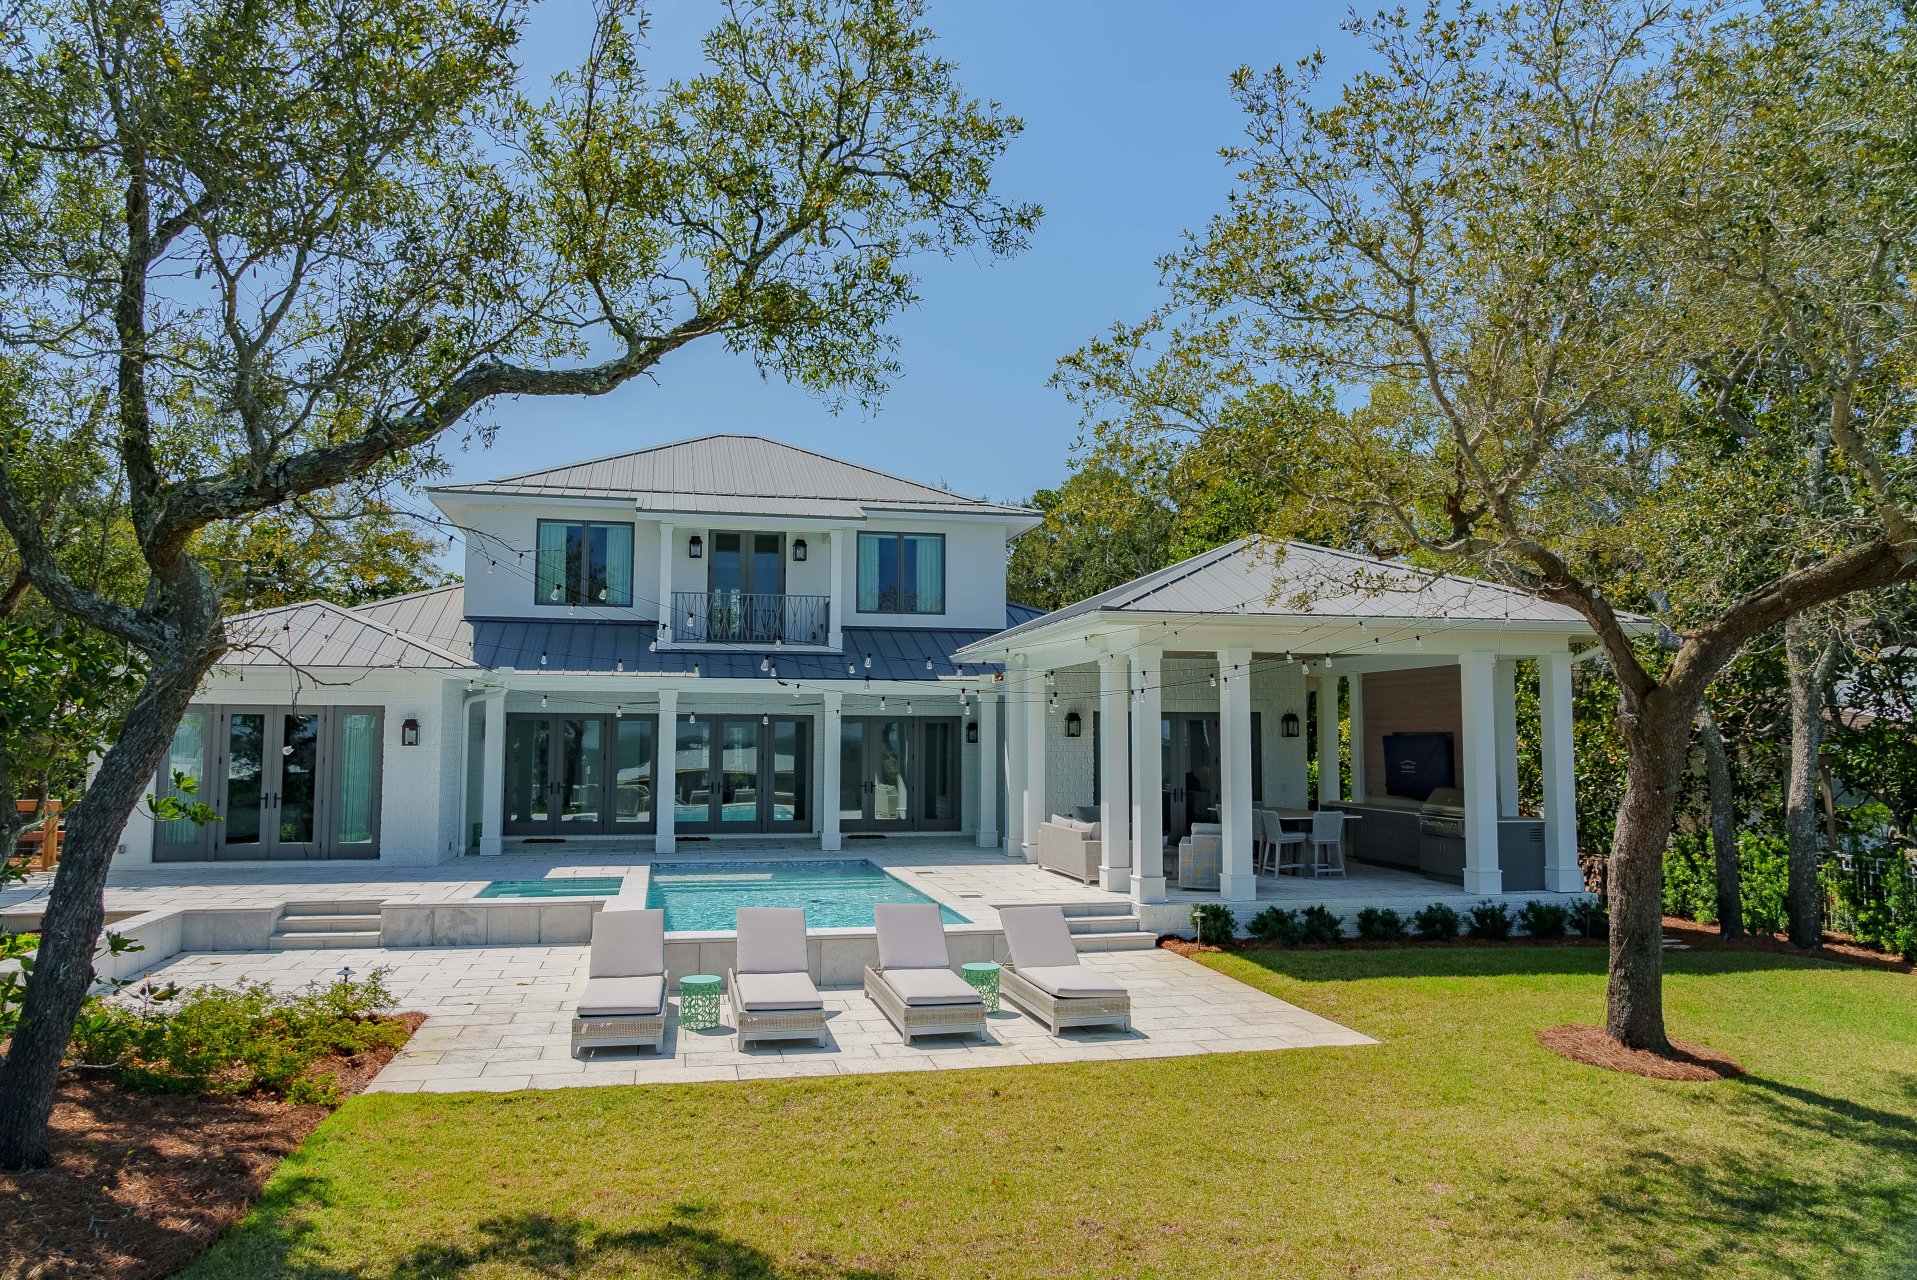 Exterior view of new 4,000 SF waterfront custom home outside of Pensacola, FL.